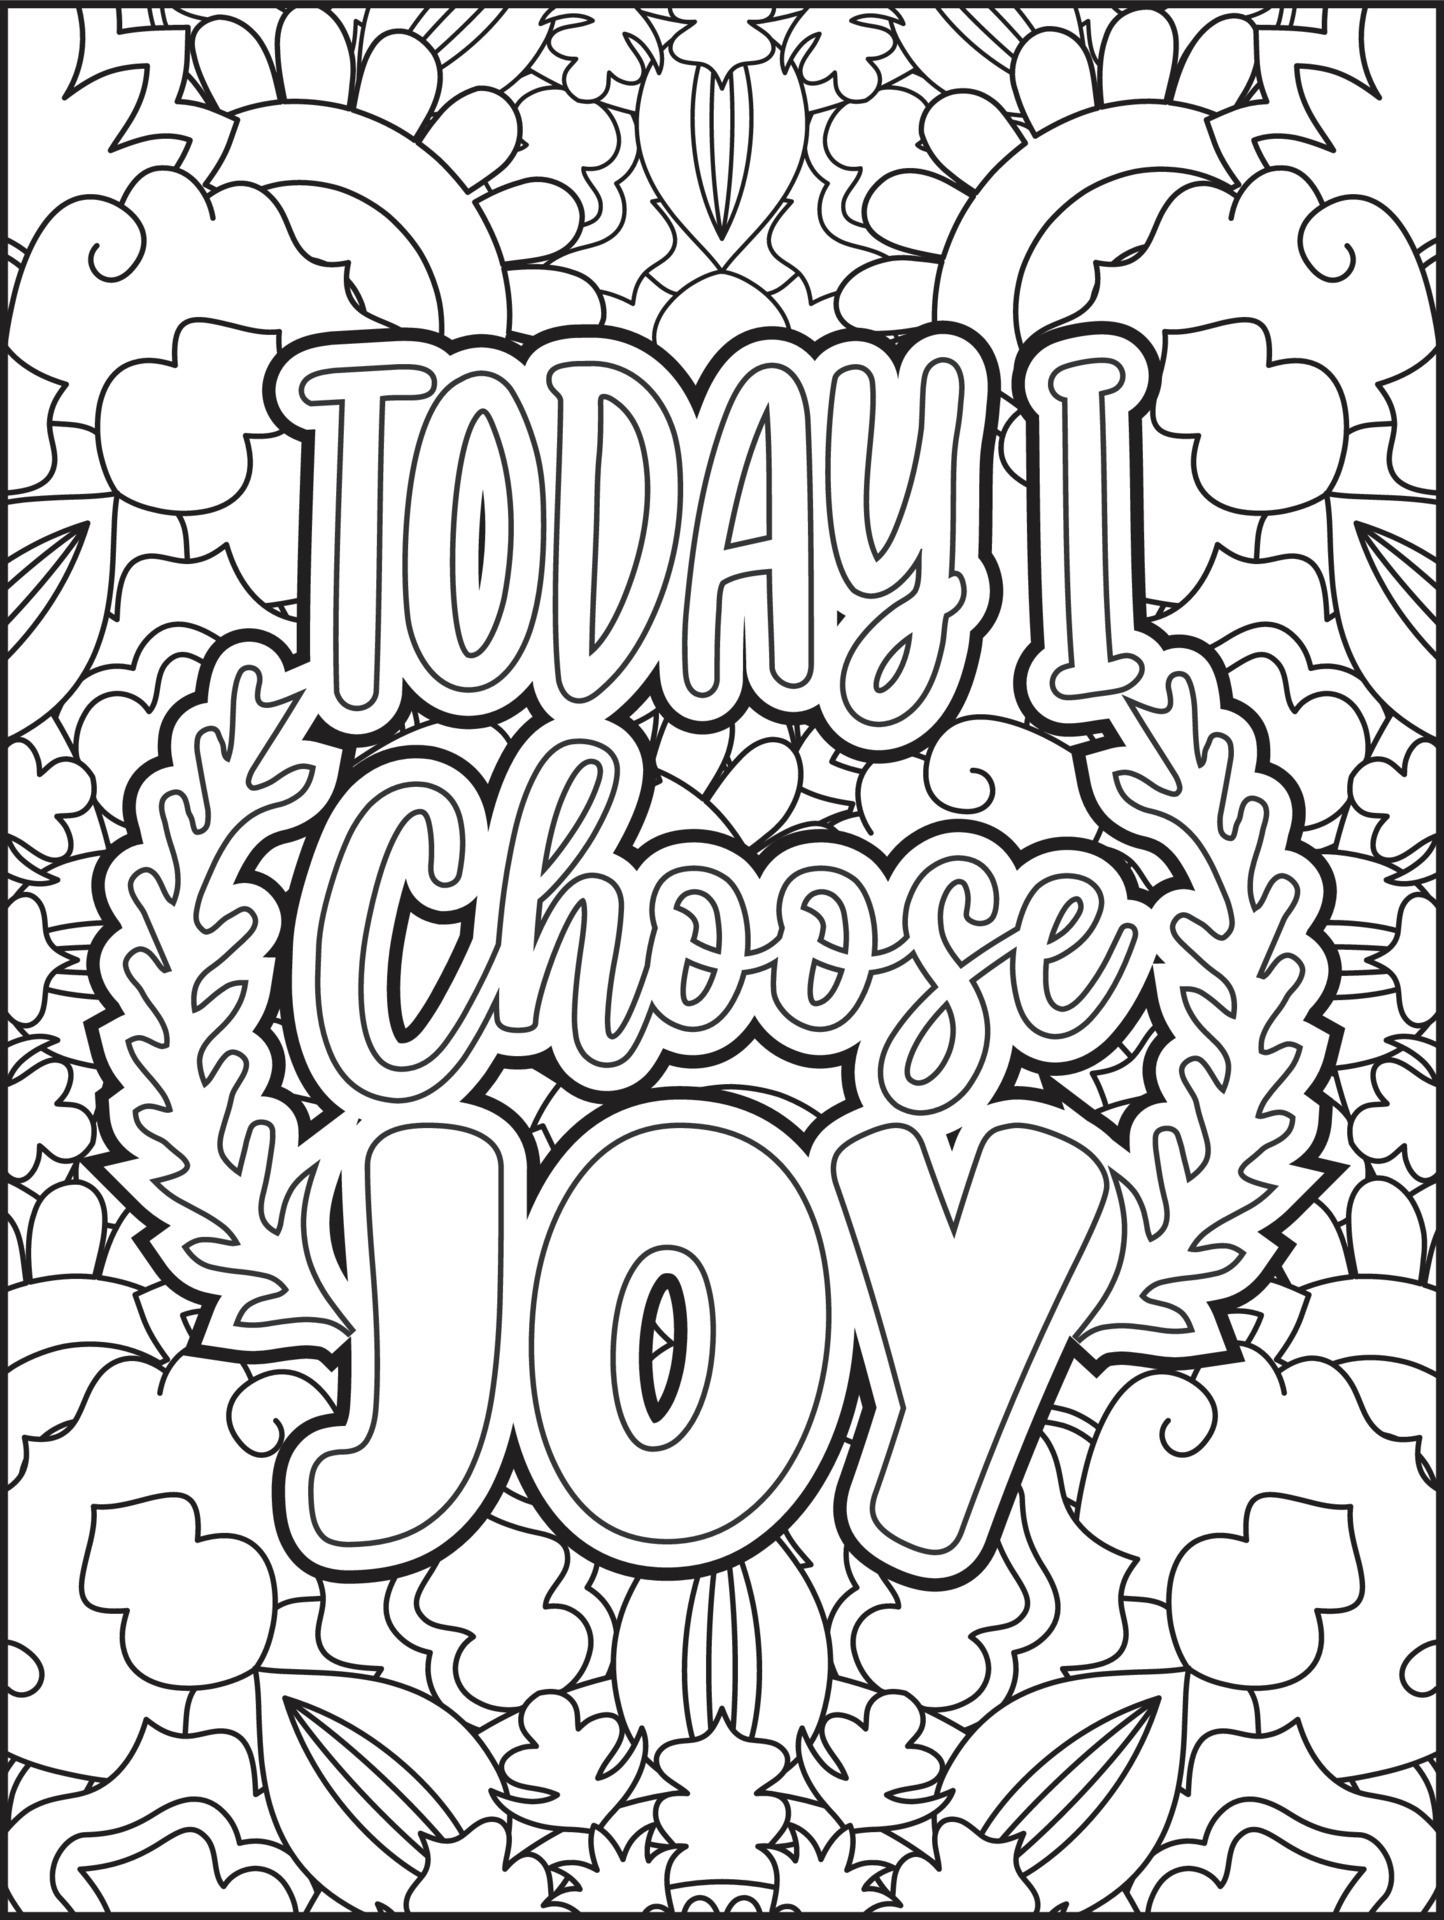 Motivational quotes coloring page. Inspirational quotes coloring page.  Positive quotes coloring page. Good vibes. Motivational swear word.  Motivational typography. 7279698 Vector Art at Vecteezy